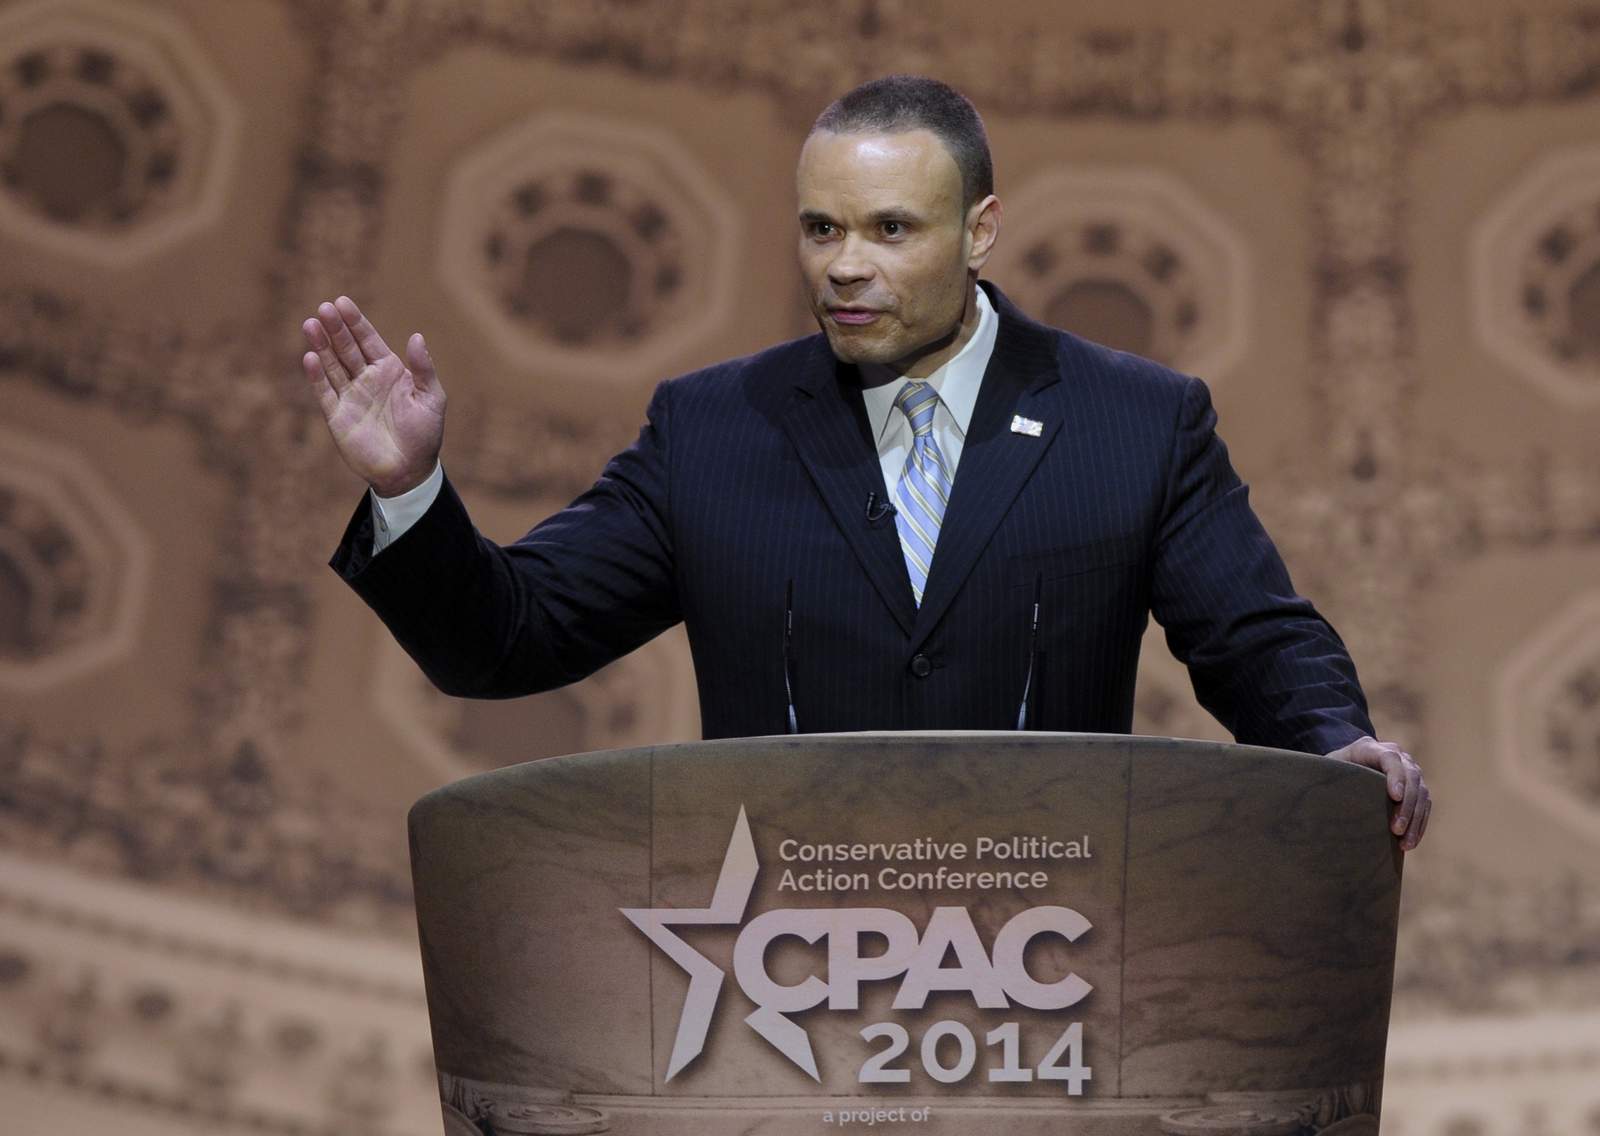 Dan Bongino tapped for national afternoon radio slot in May